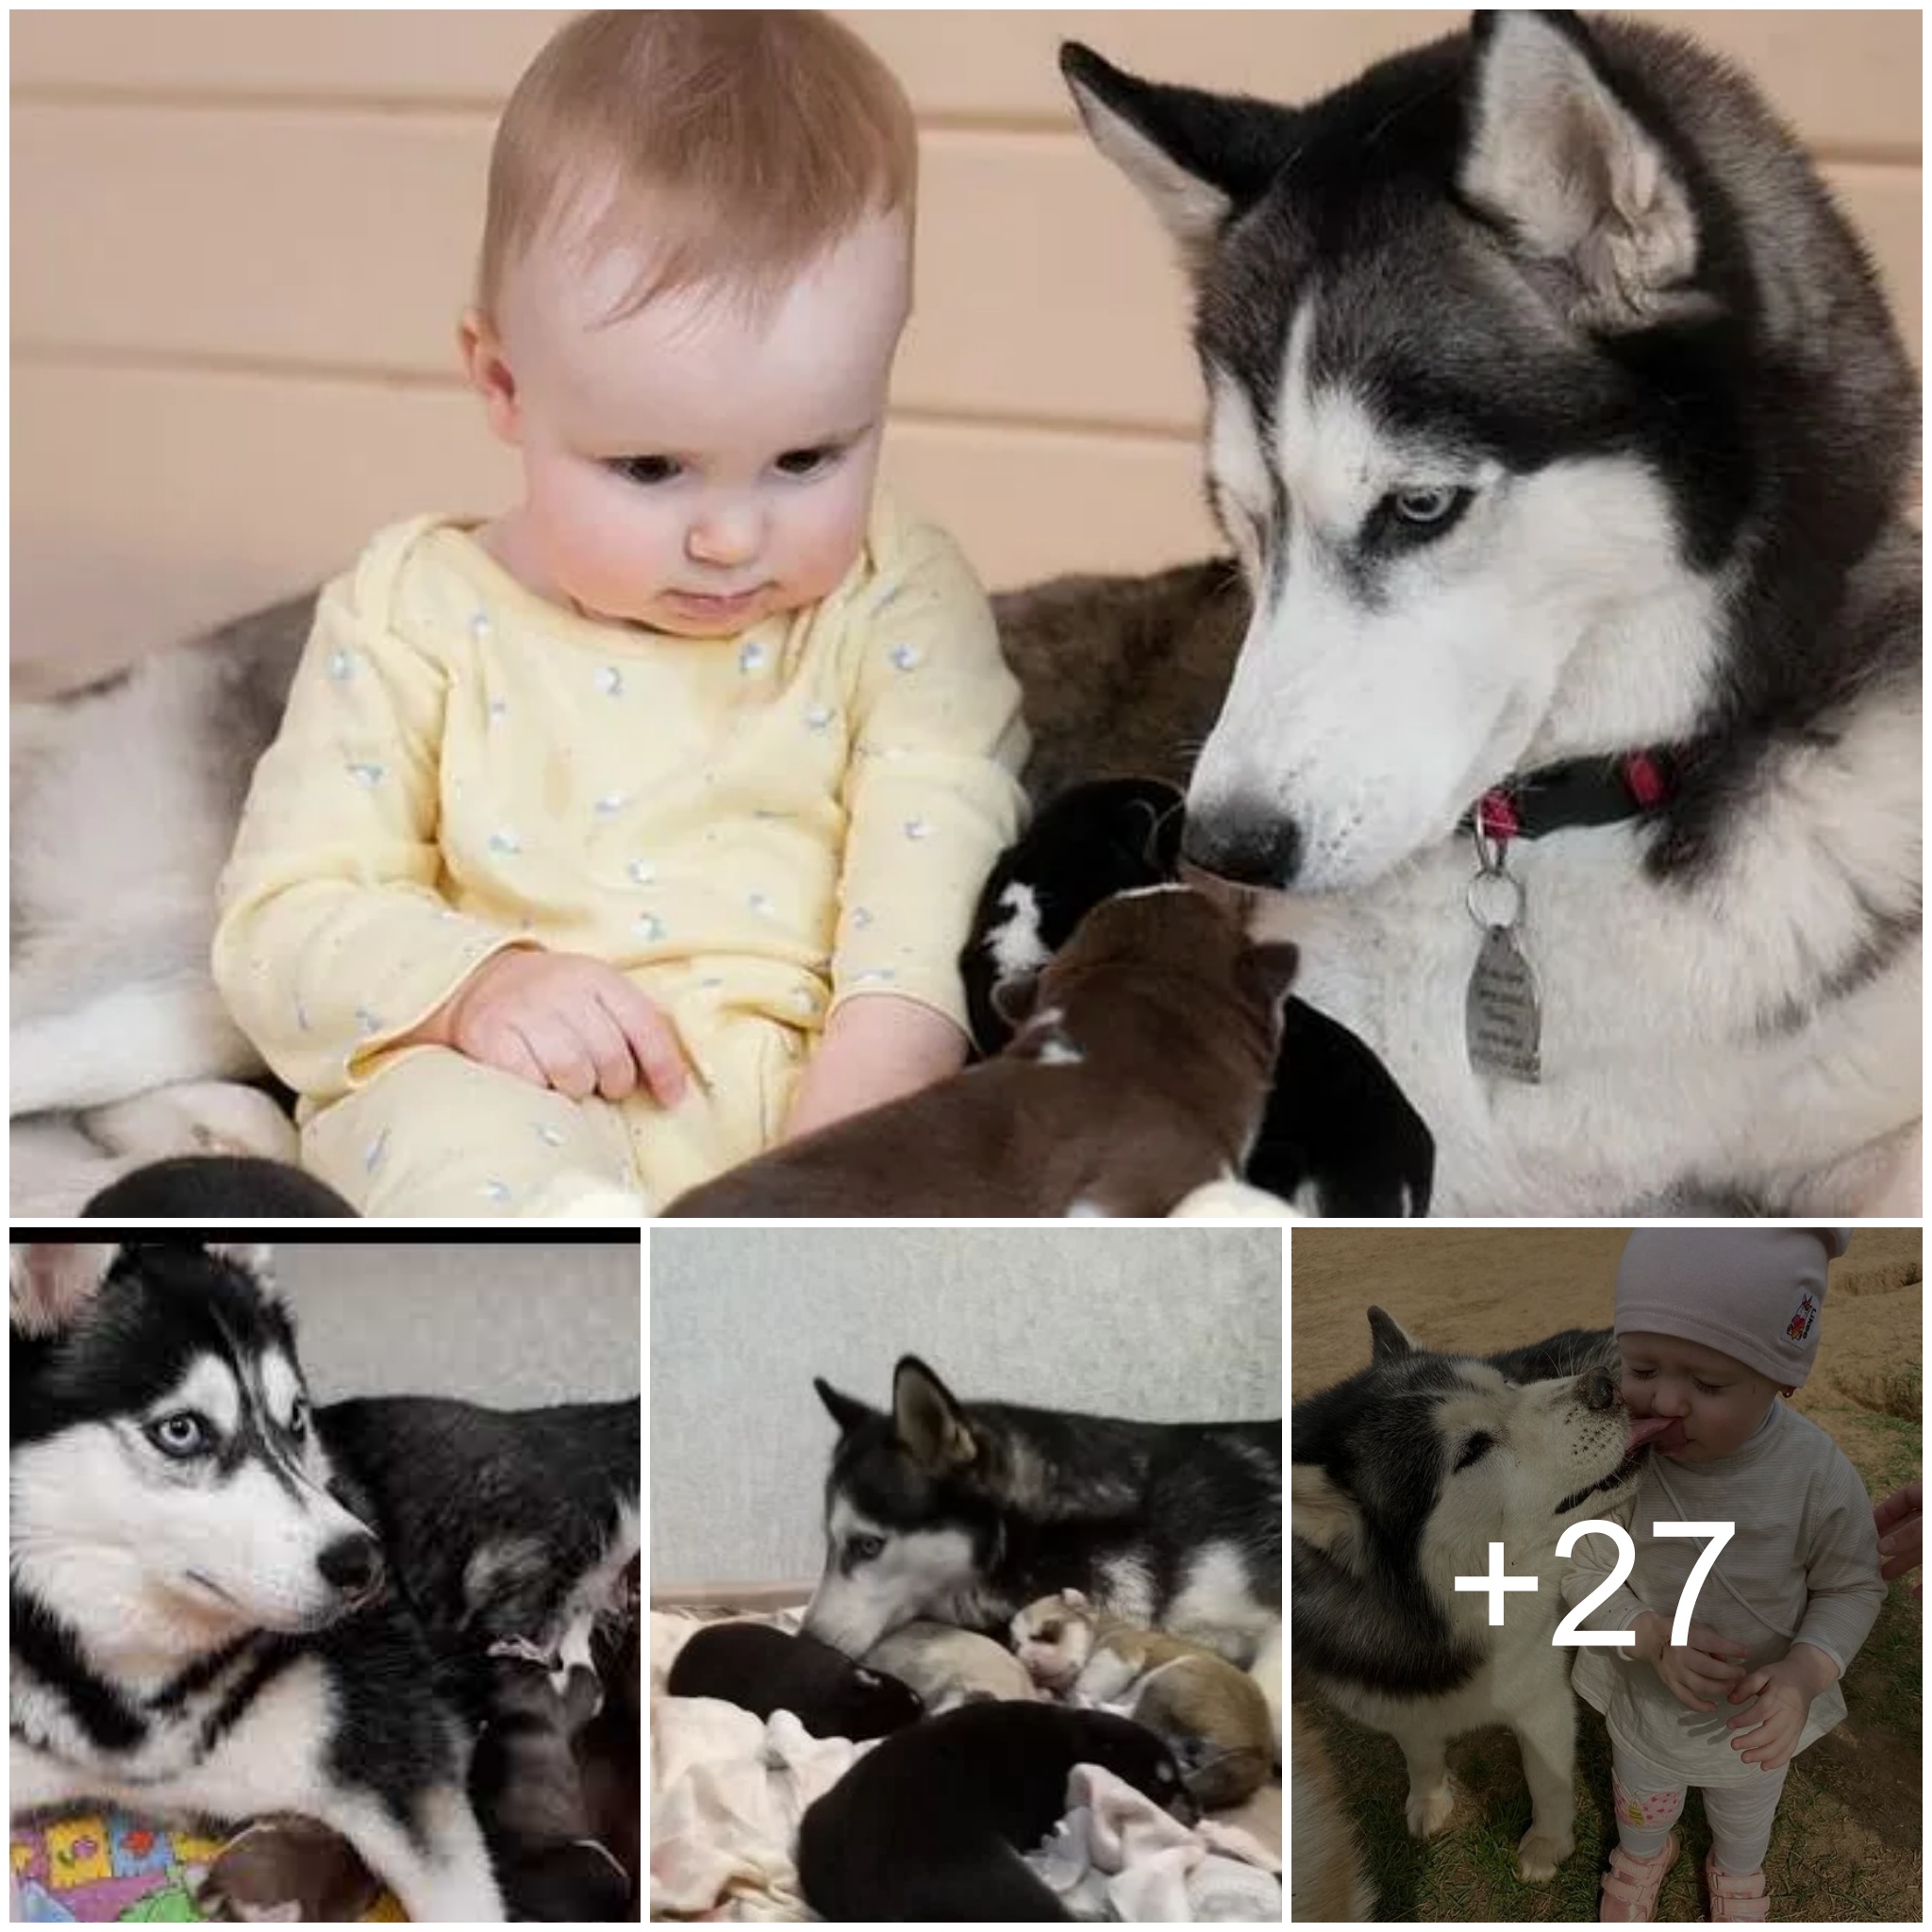 Unconditional Love: Heartwarming Dog Gives 1-Year-Old Baby a Kiss, Showcasing Cross-Species Affection